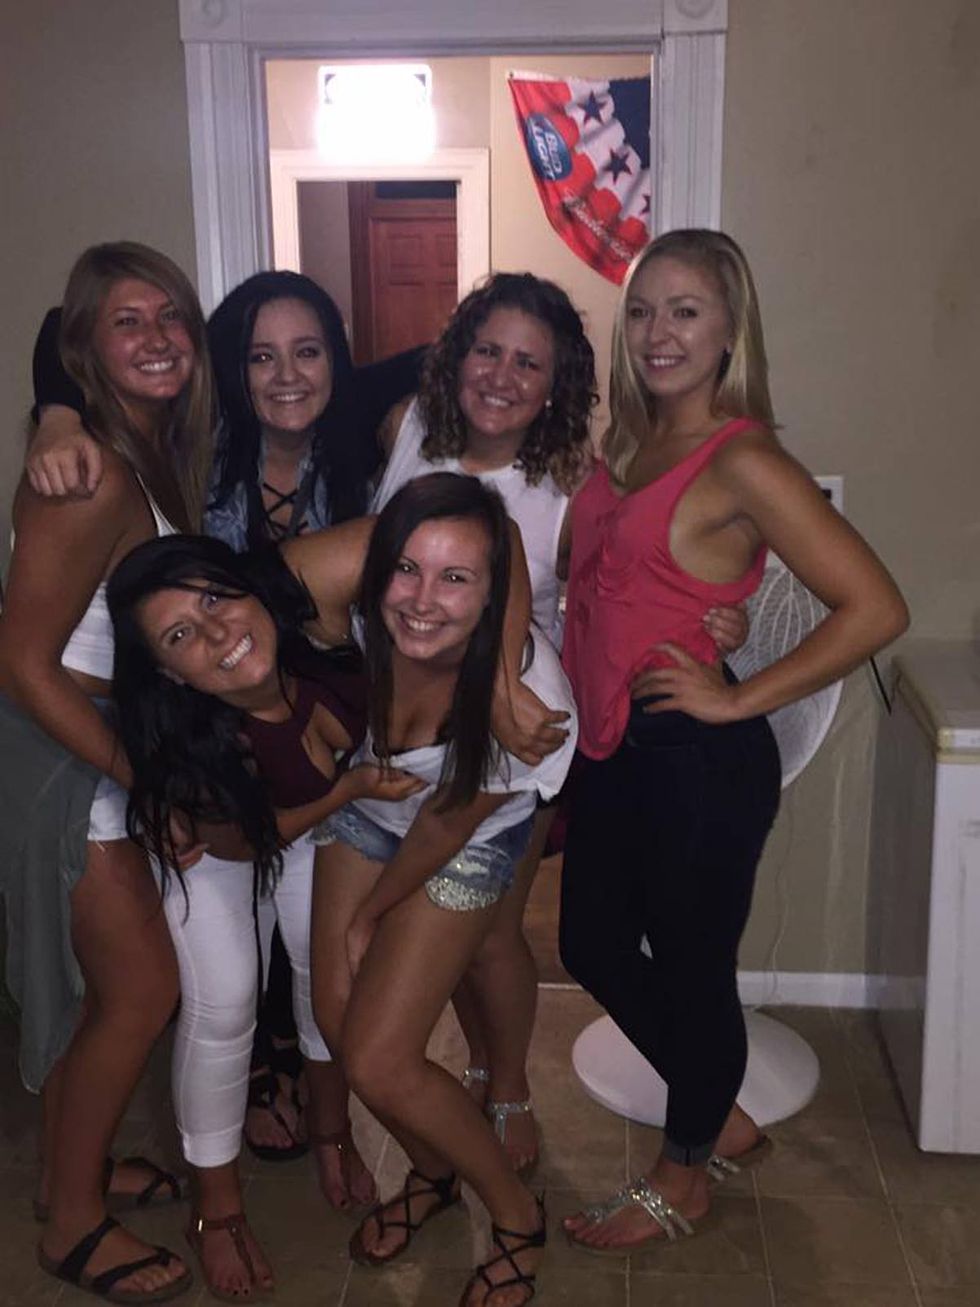 8 Things I Wish I Didn't Have To Say To My Friends Before A Night Out